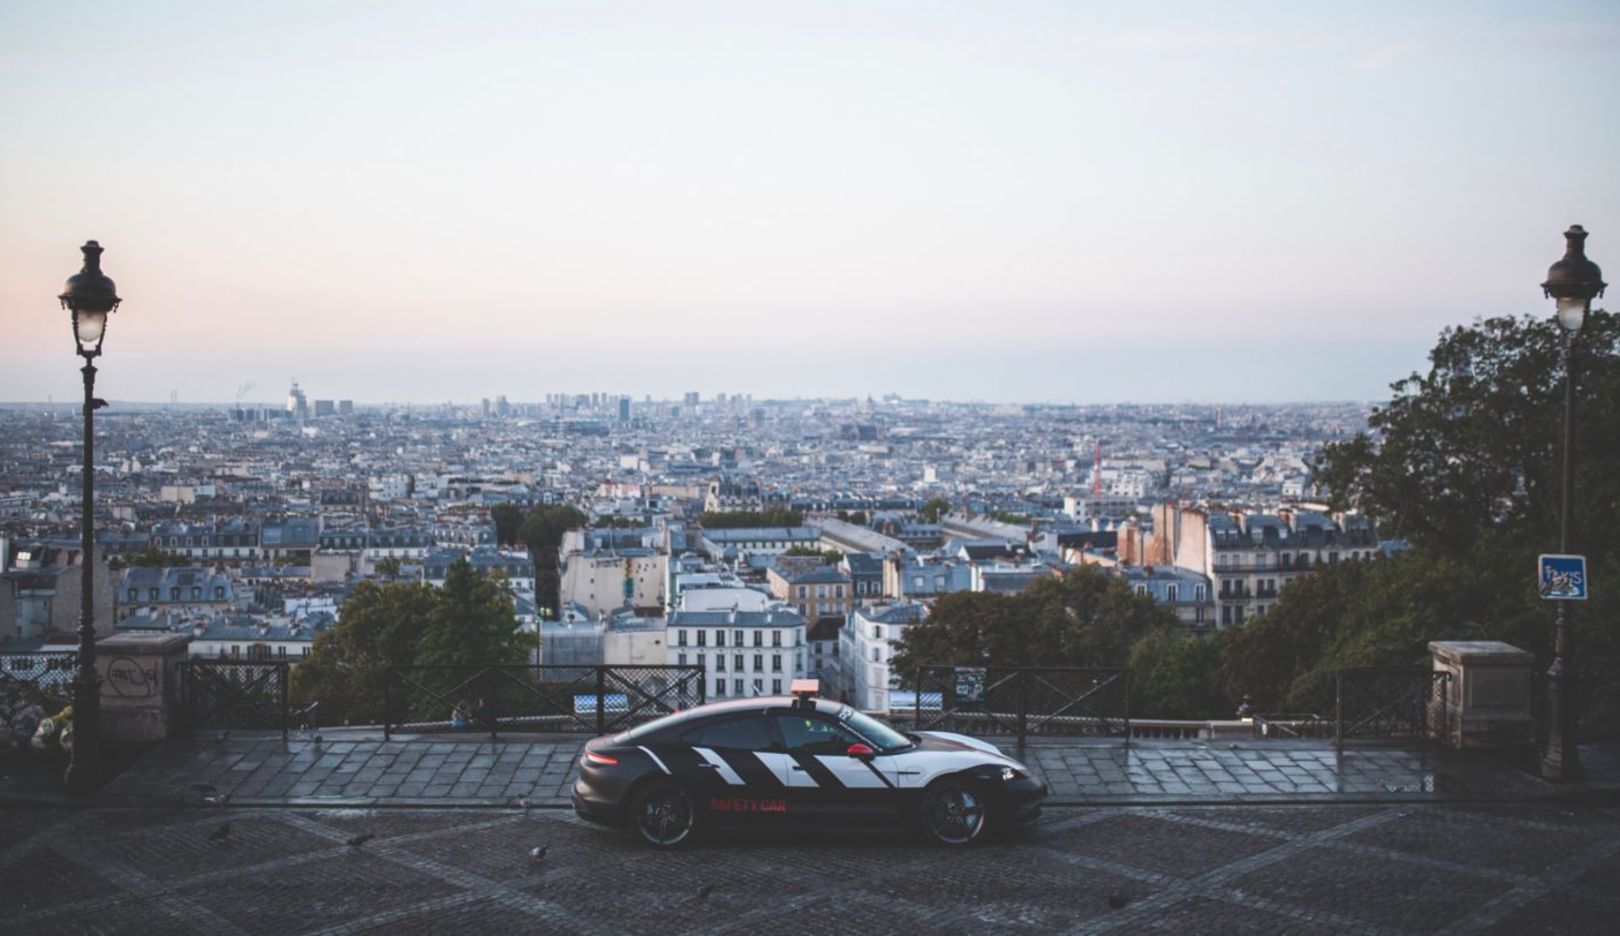 At sunrise, the journey continues. The Porsche Taycan drives through the narrow lanes of Montmartre up to the Basilica of Sacré-Cœur and a magnificent view of Paris awakening.